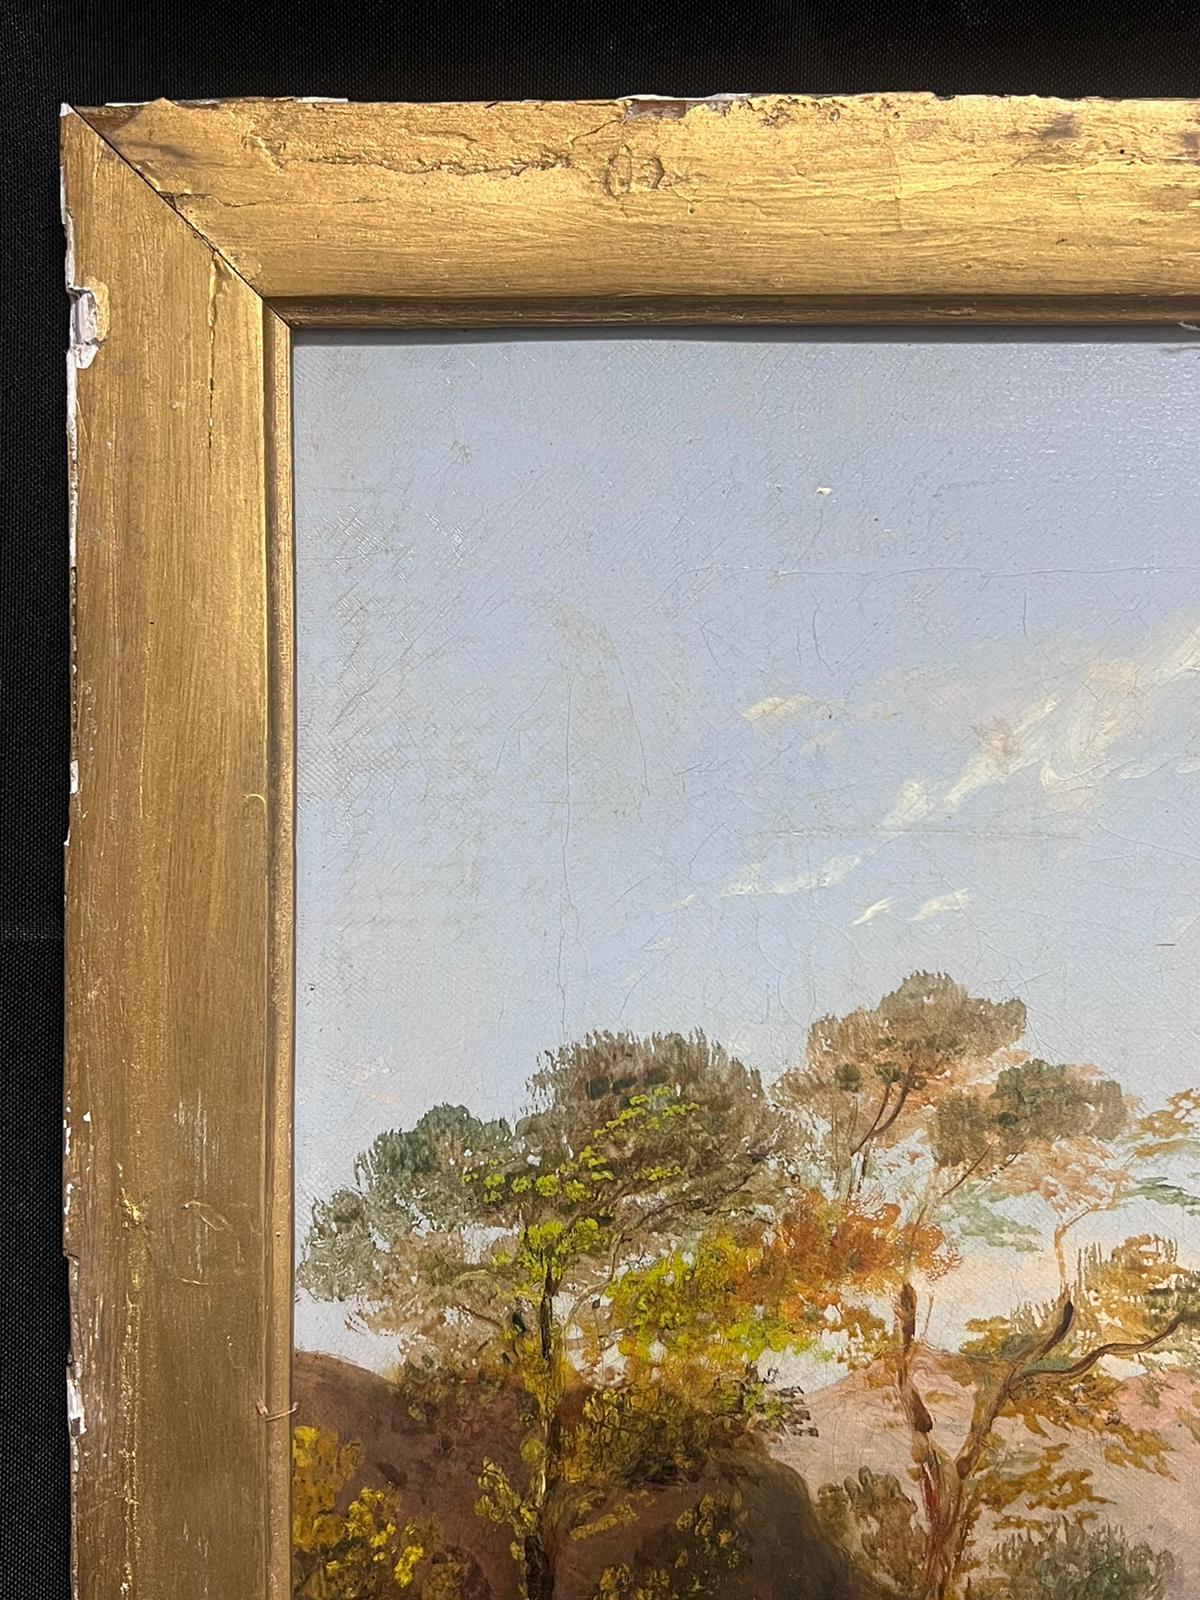 Sunshine in the Scottish Highlands
British School, 19th century
oil on canvas, framed
framed: 26.5 x 36.5 inches
canvas: 24.5 x 35.5 inches
provenance: private collection, UK
condition: very good and sound condition, the frame is quite tatty and